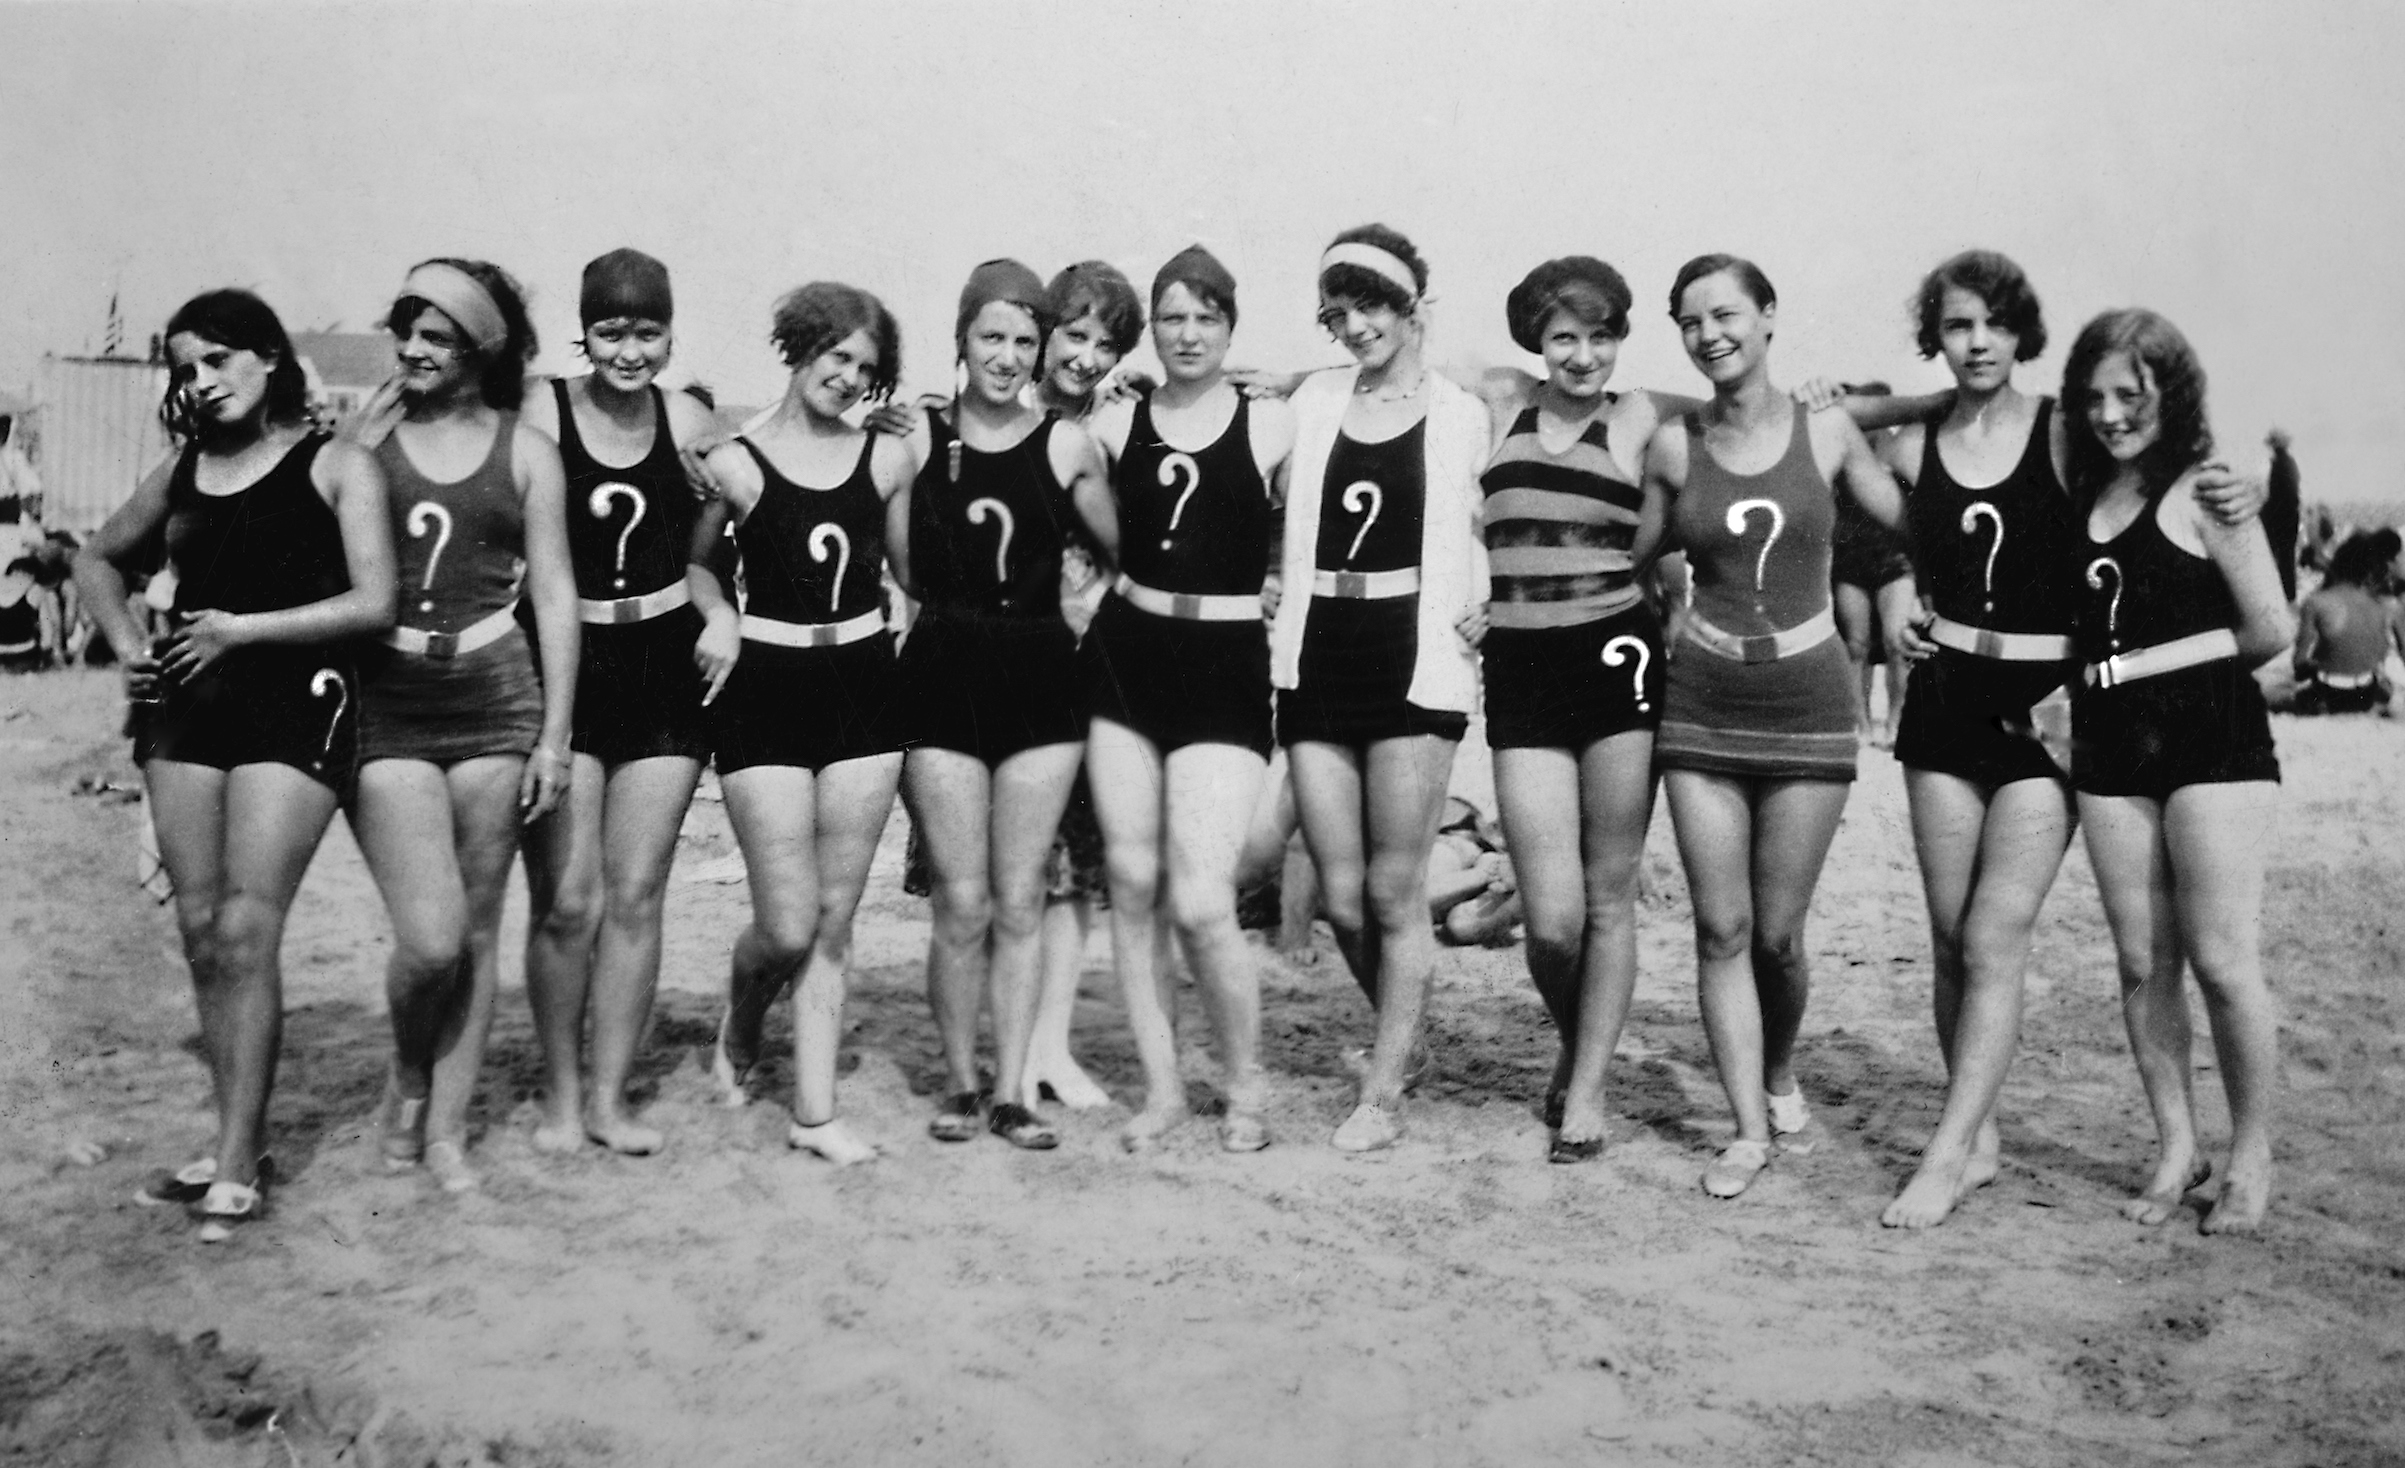 A group of flappers with question marks on their swim suits pose together on the beach, ca. 1925. (Corbis via Getty Images)